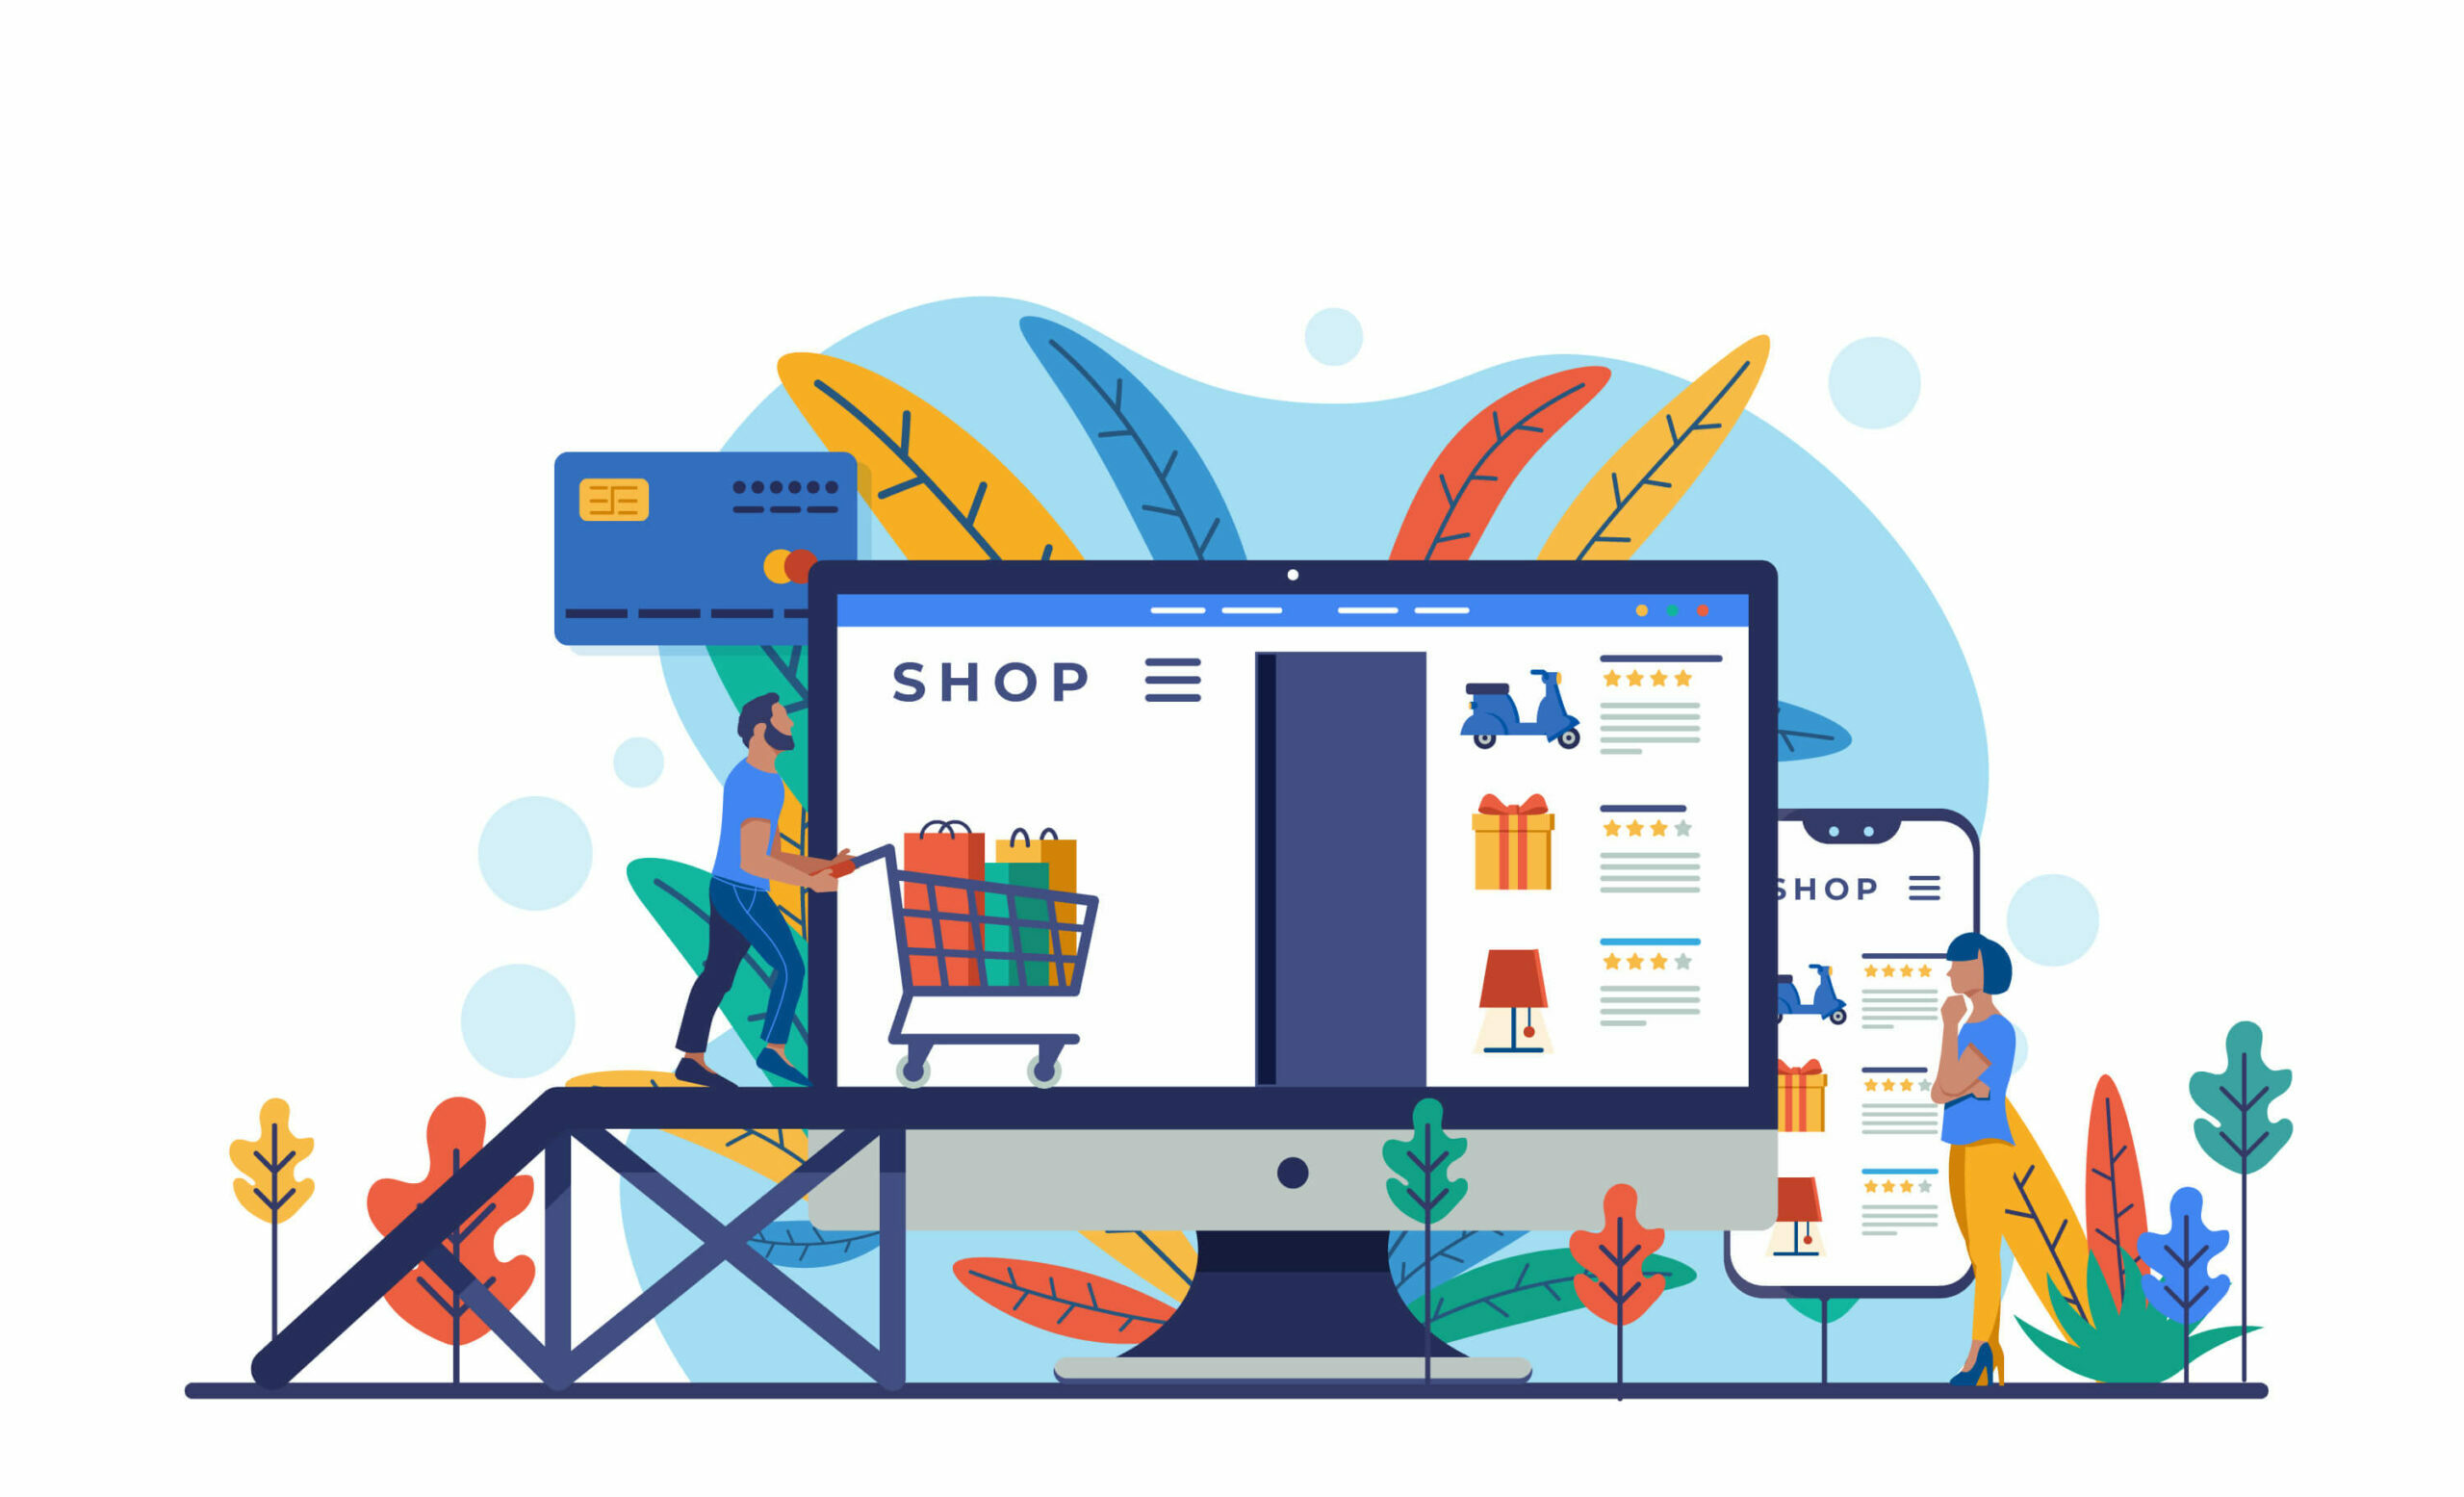 SEO strategy for ecommerce websites